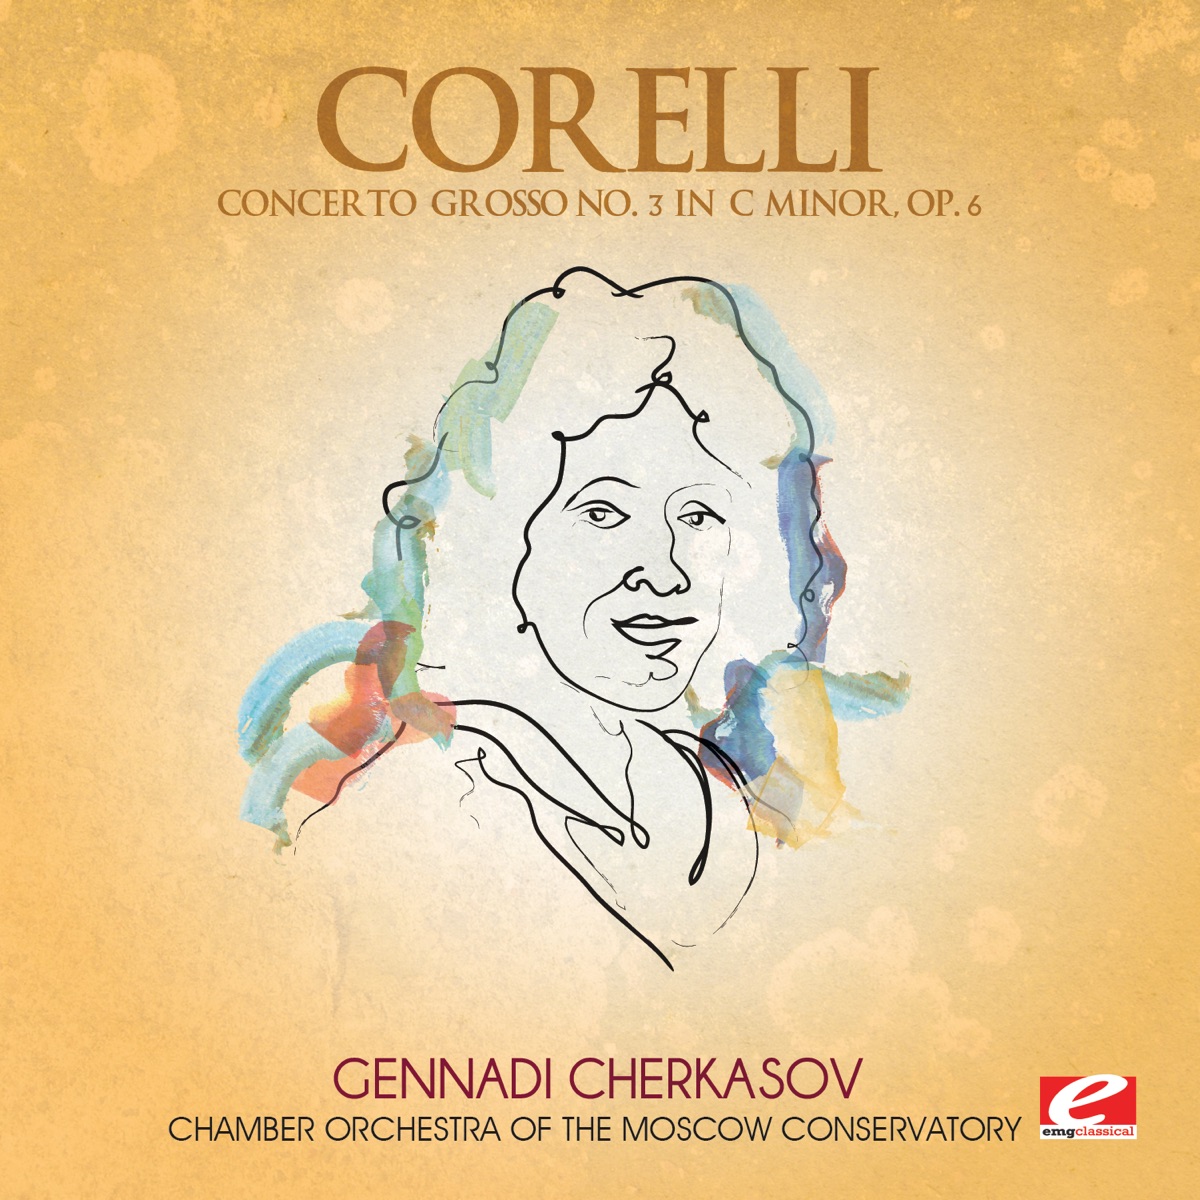 Corelli: Concerto Grosso No. 9 in F Major, Op. 6 (Remastered) - EP by  Chamber Orchestra of the Moscow Conservatory & Gennadi Cherkasov on Apple  Music